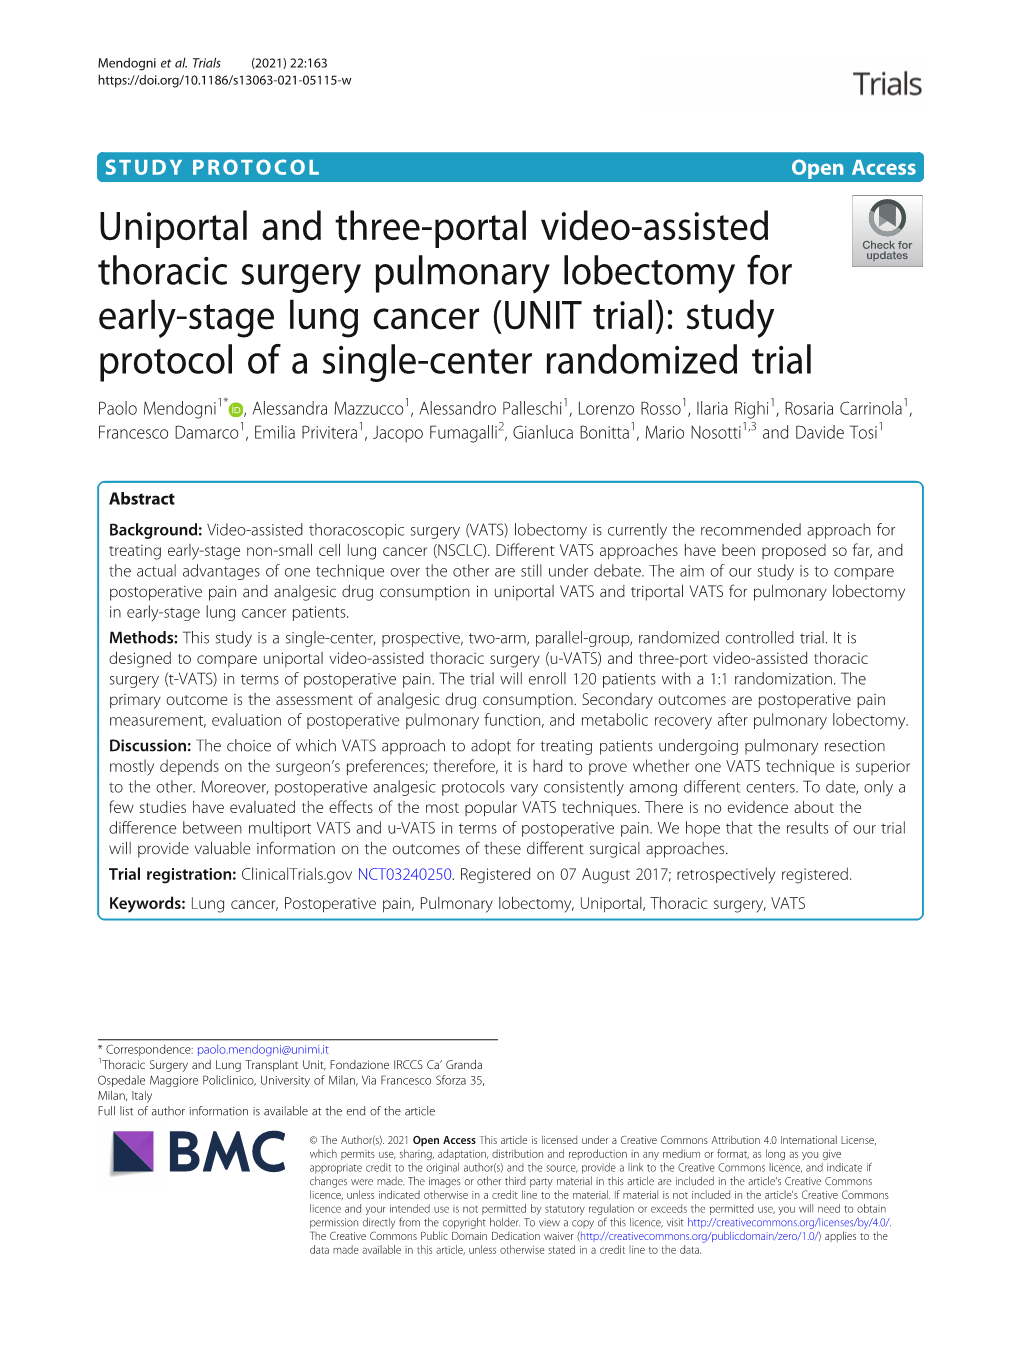 Uniportal and Three-Portal Video-Assisted Thoracic Surgery